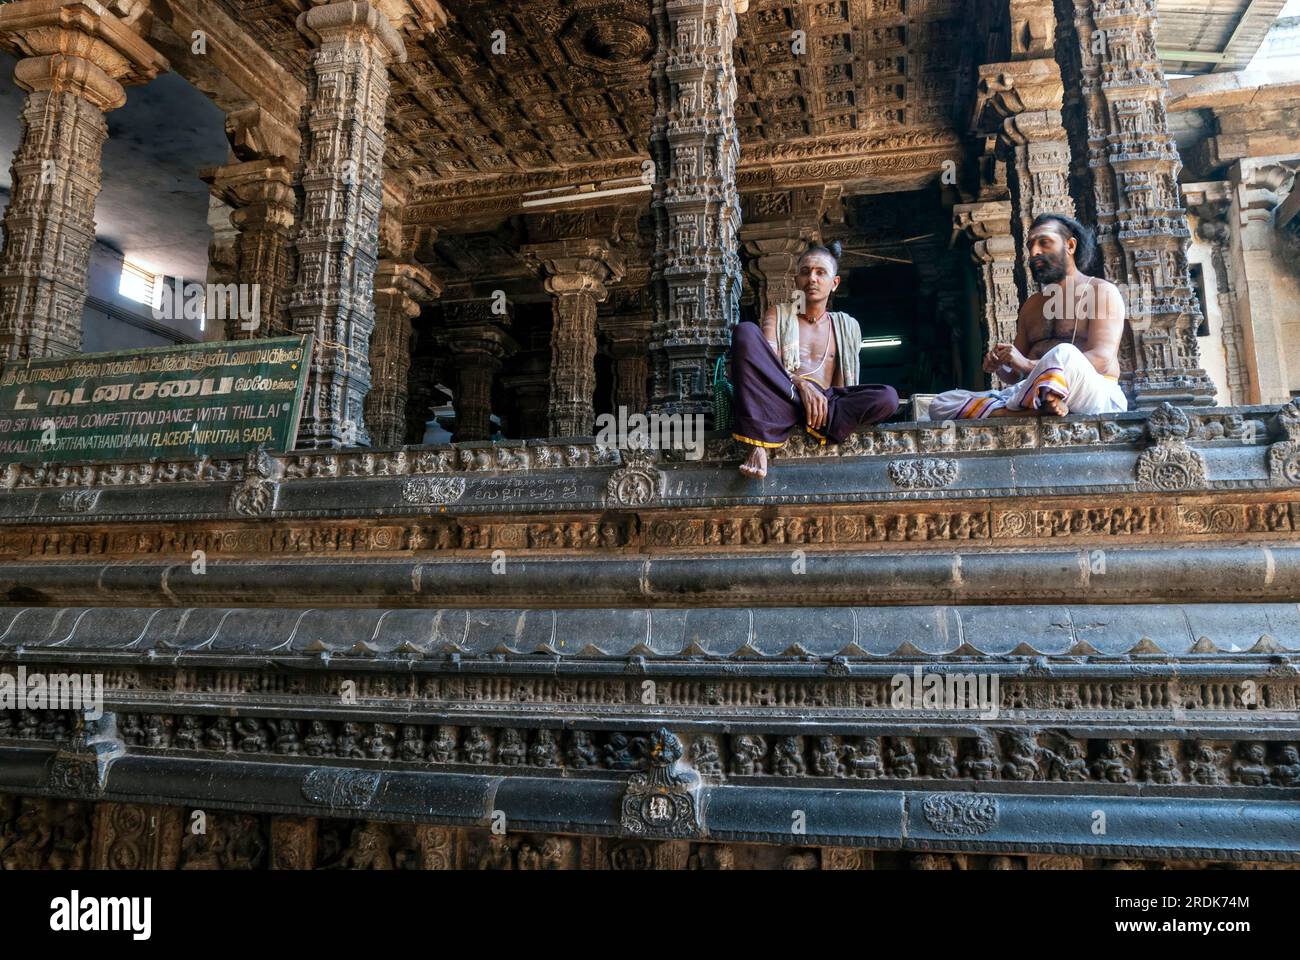 Temple priests at the Nritta Sabha or Hall of Dance with some fine pillars in Thillai Nataraja temple, Chidambaram, Tamil Nadu, South India, India Stock Photo